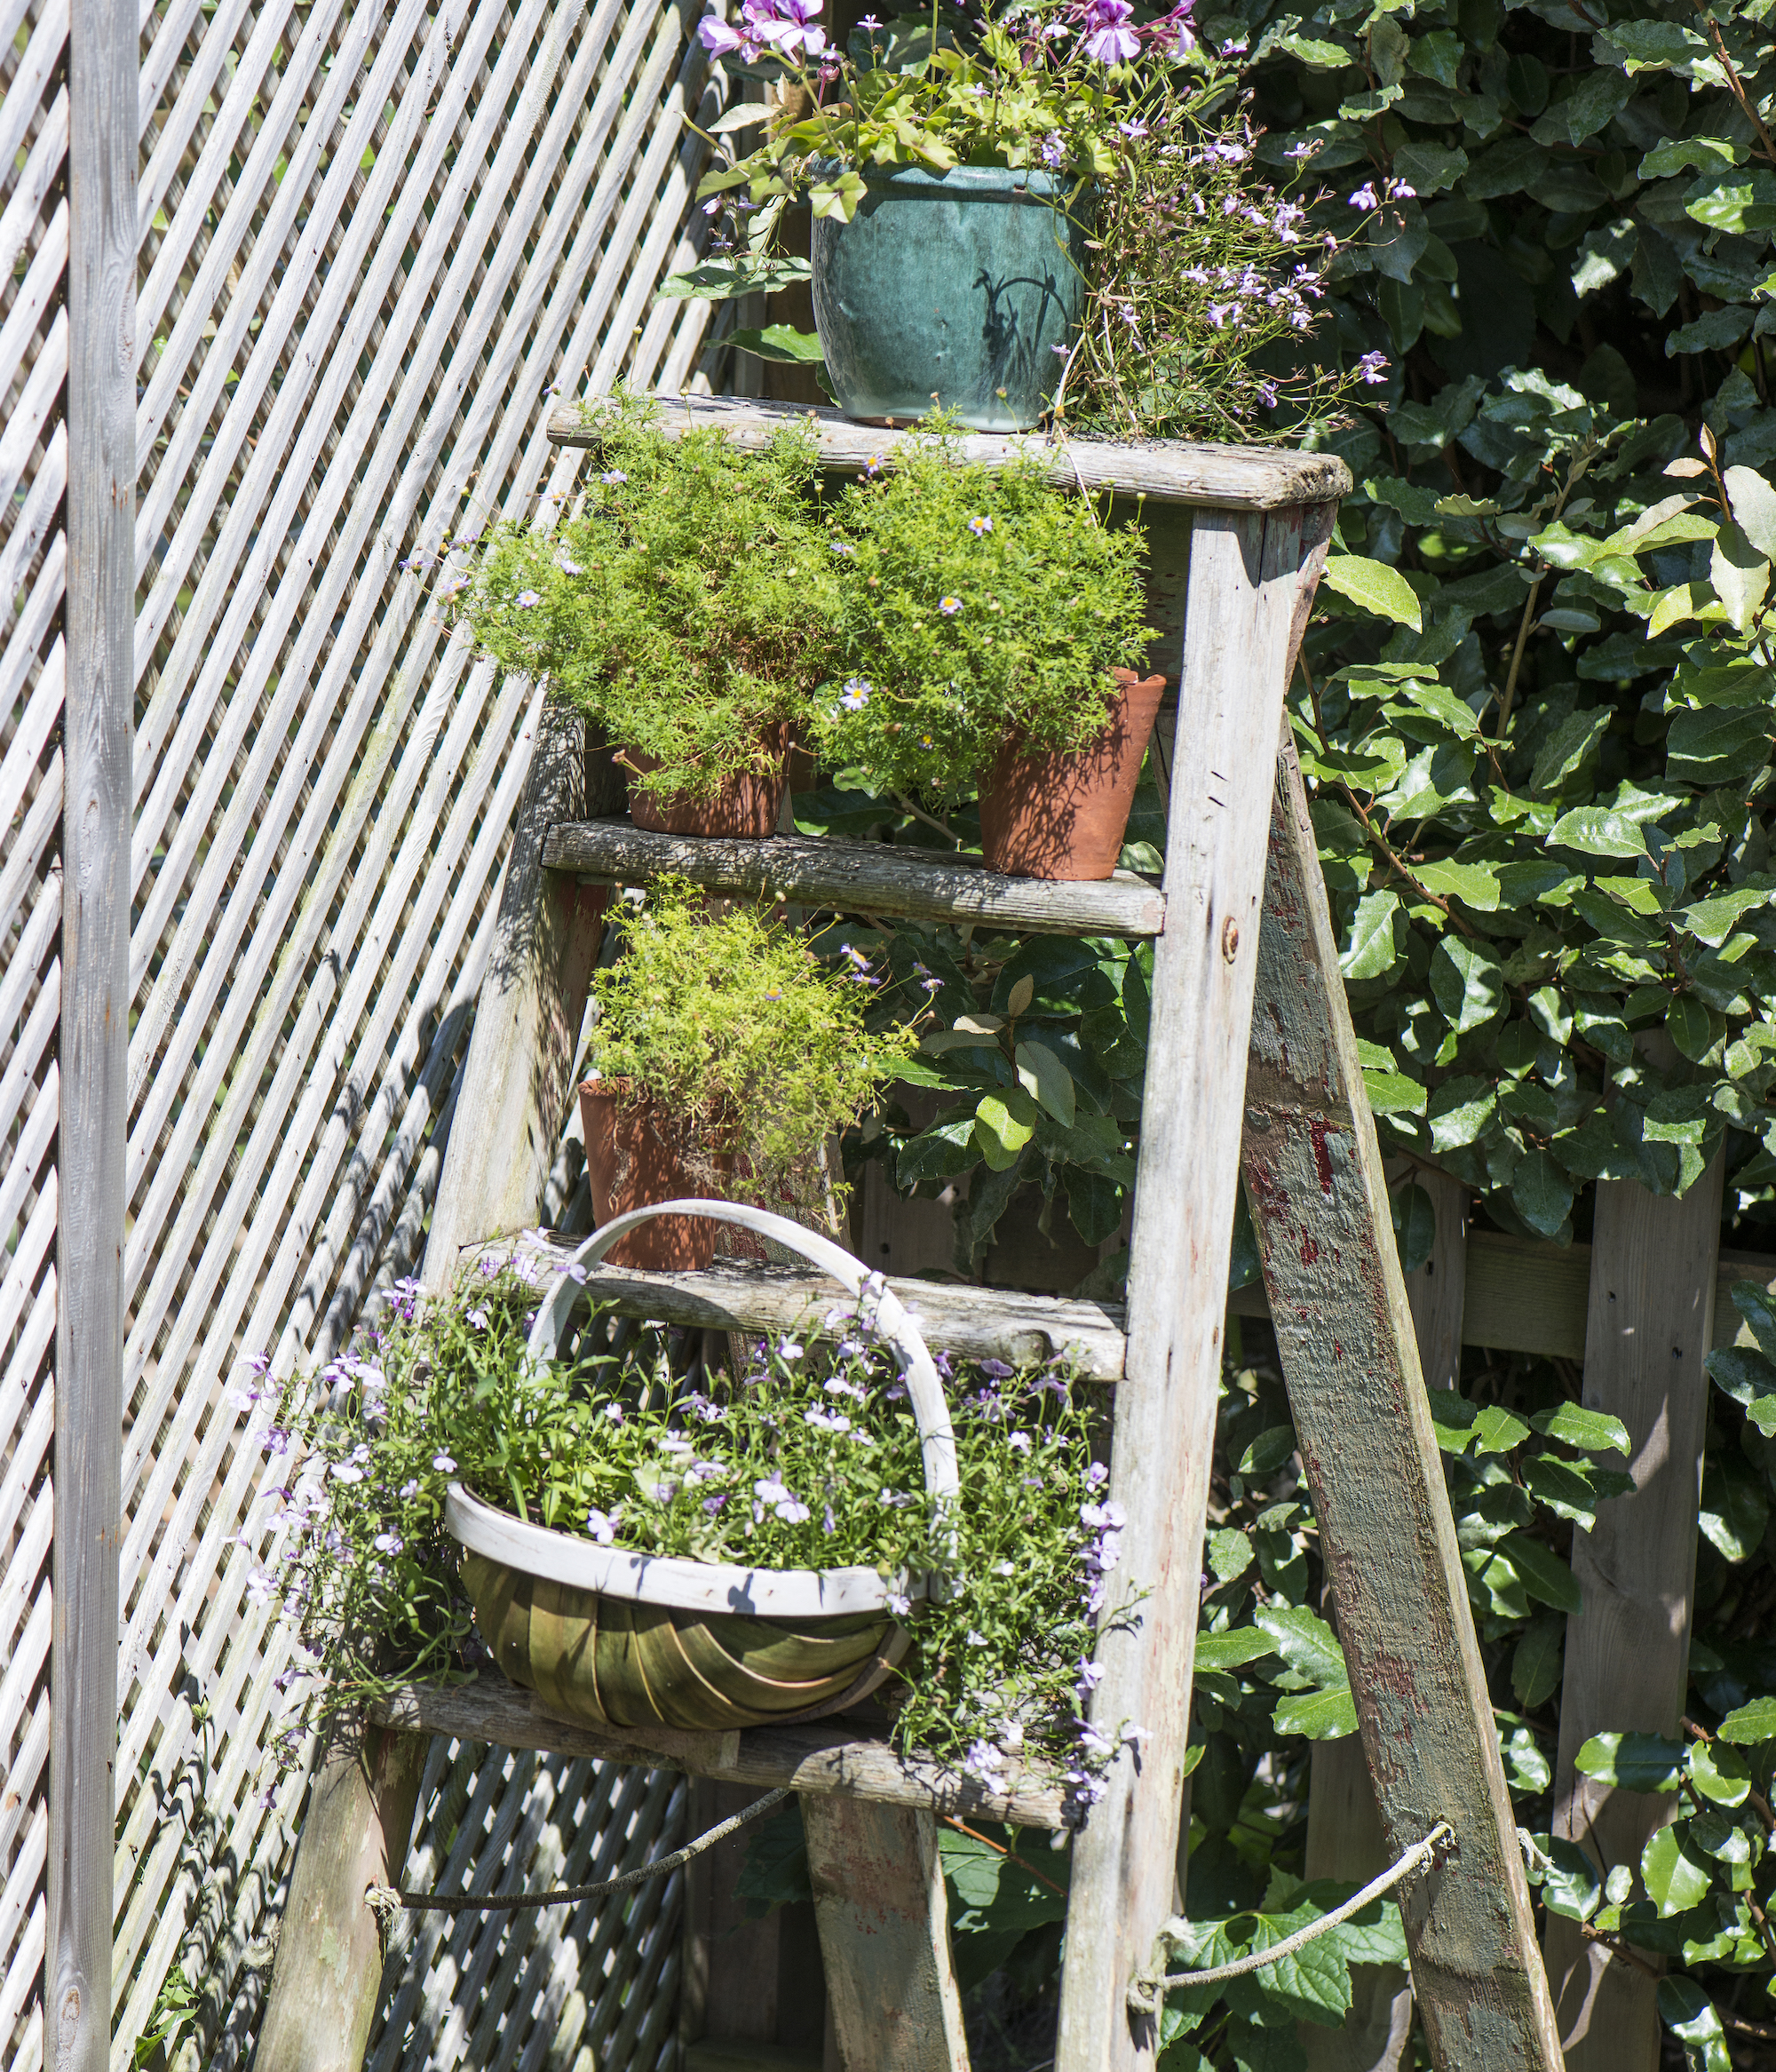 Wooden step ladder holding potted plants in garden